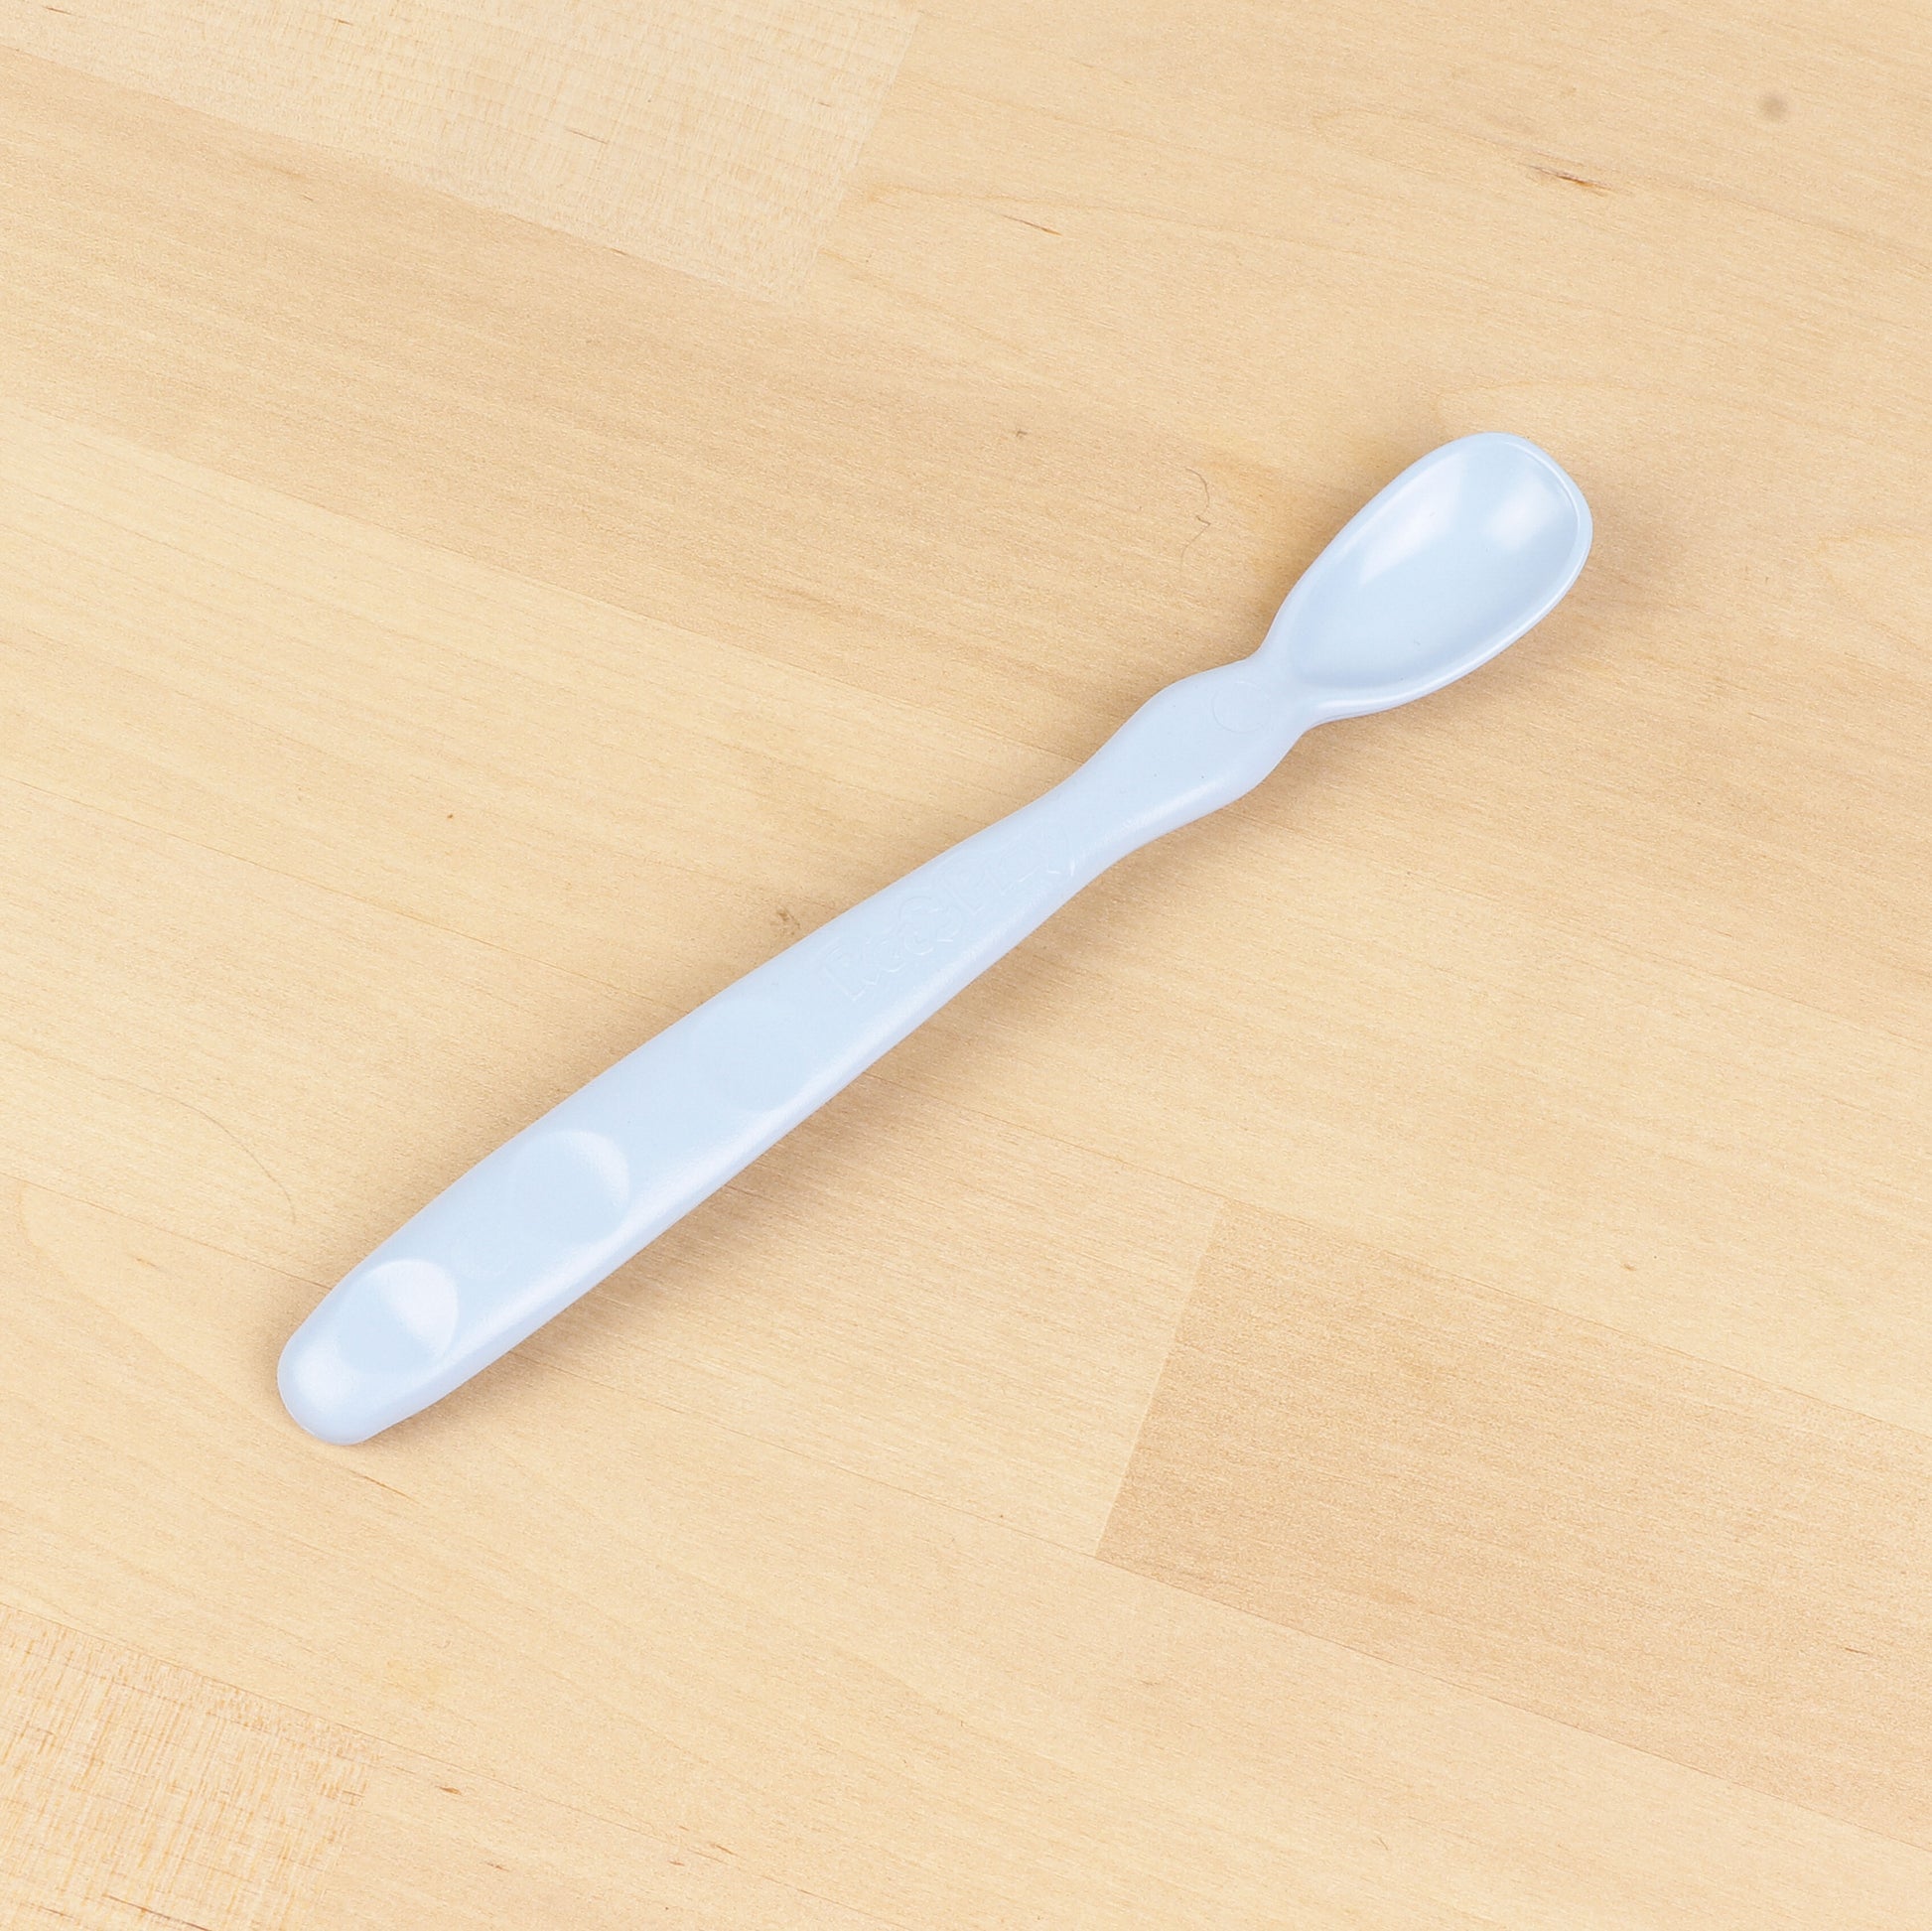 Re-Play Infant Spoon in Ice Blue from Bear & Moo